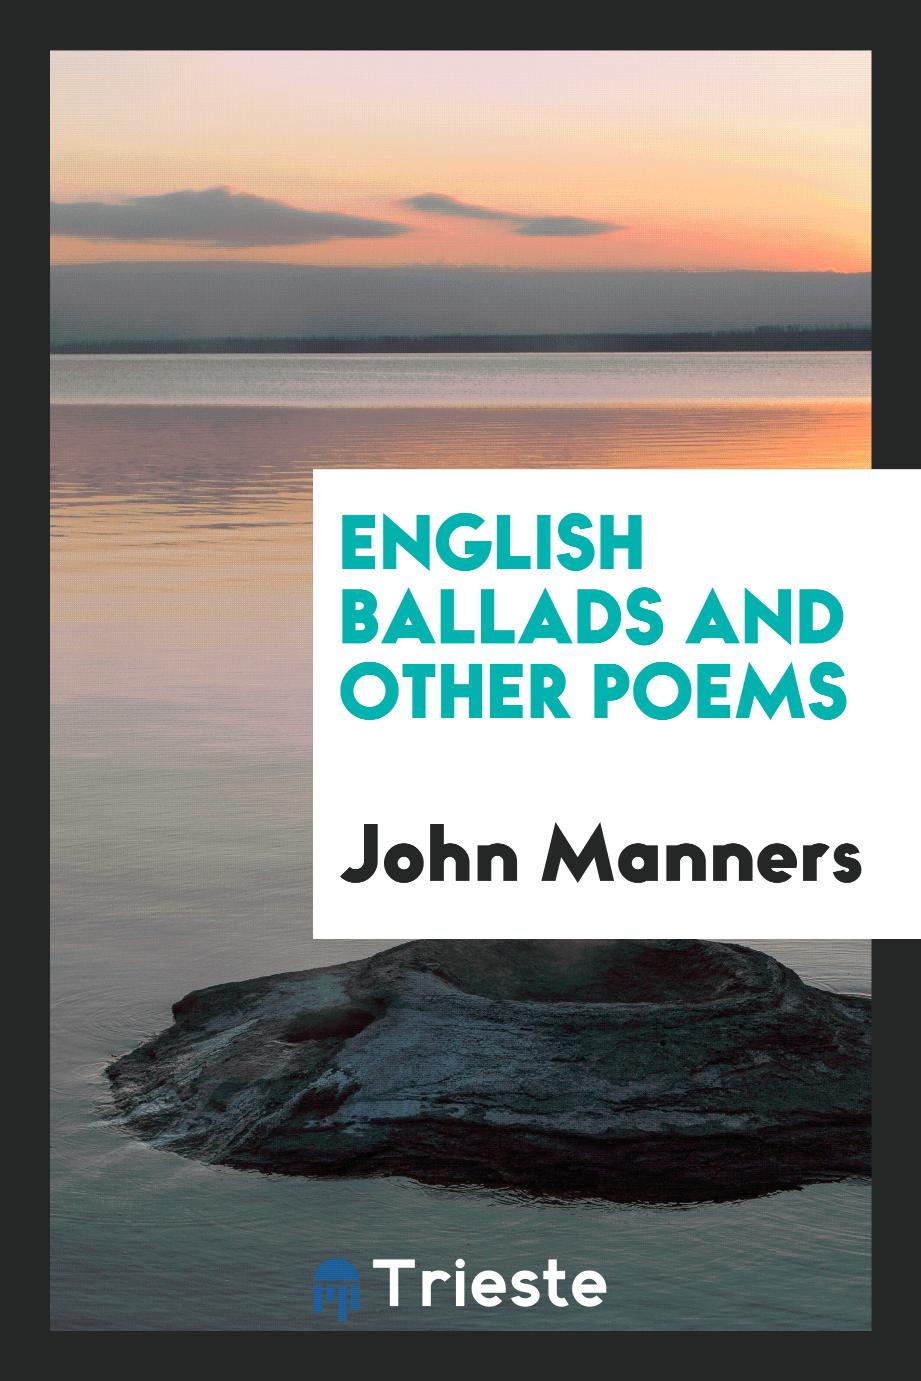 English Ballads and Other Poems